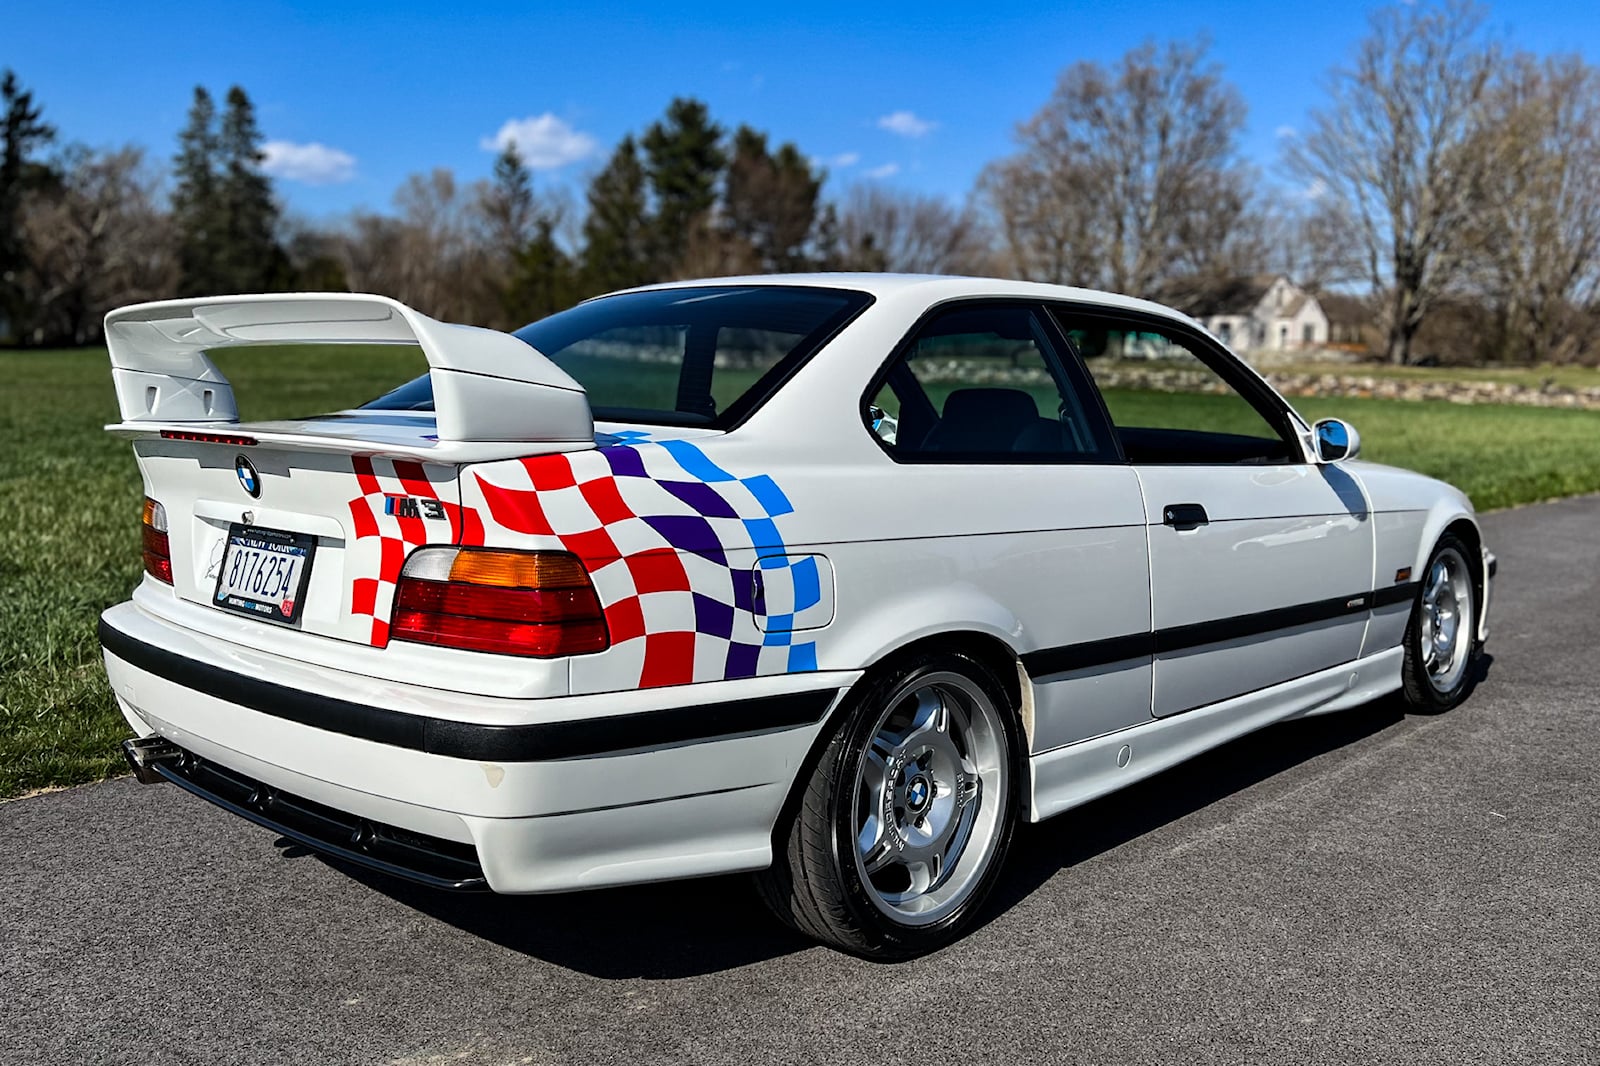 E36 BMW M3 Lightweight Is The Coolest M3 Built For America